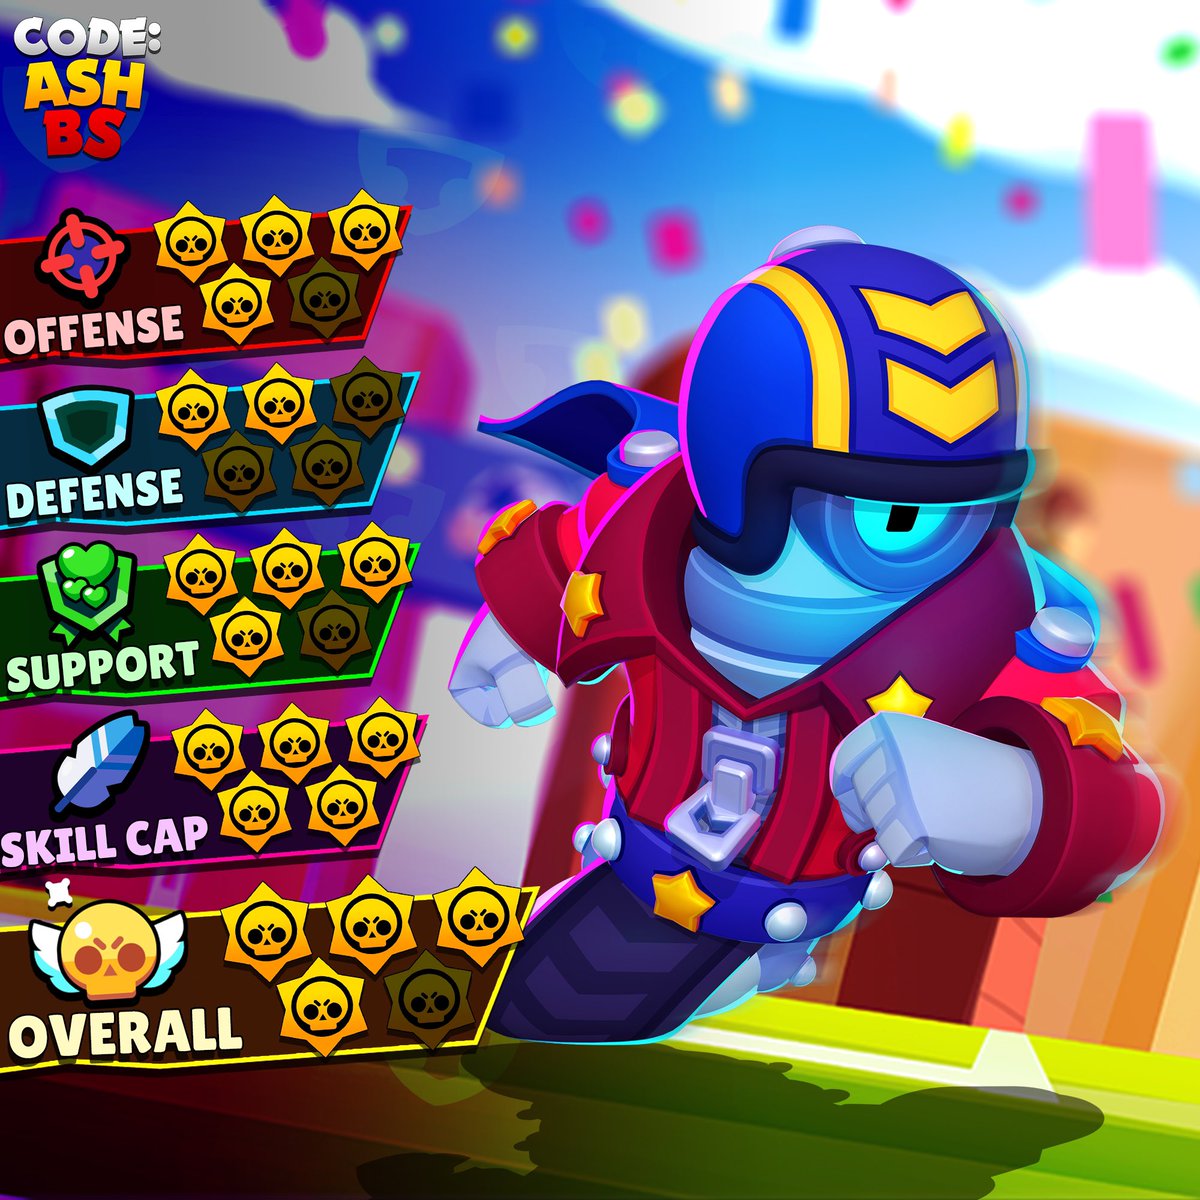 Code Ashbs On Twitter Stu S Power Ratings Great On Offense For Fast Aggressive Plays And Distraction Poor Defense Due To Low Dps But Can Stun Burn With Super Amazing Gadget For - cycle brawl stars